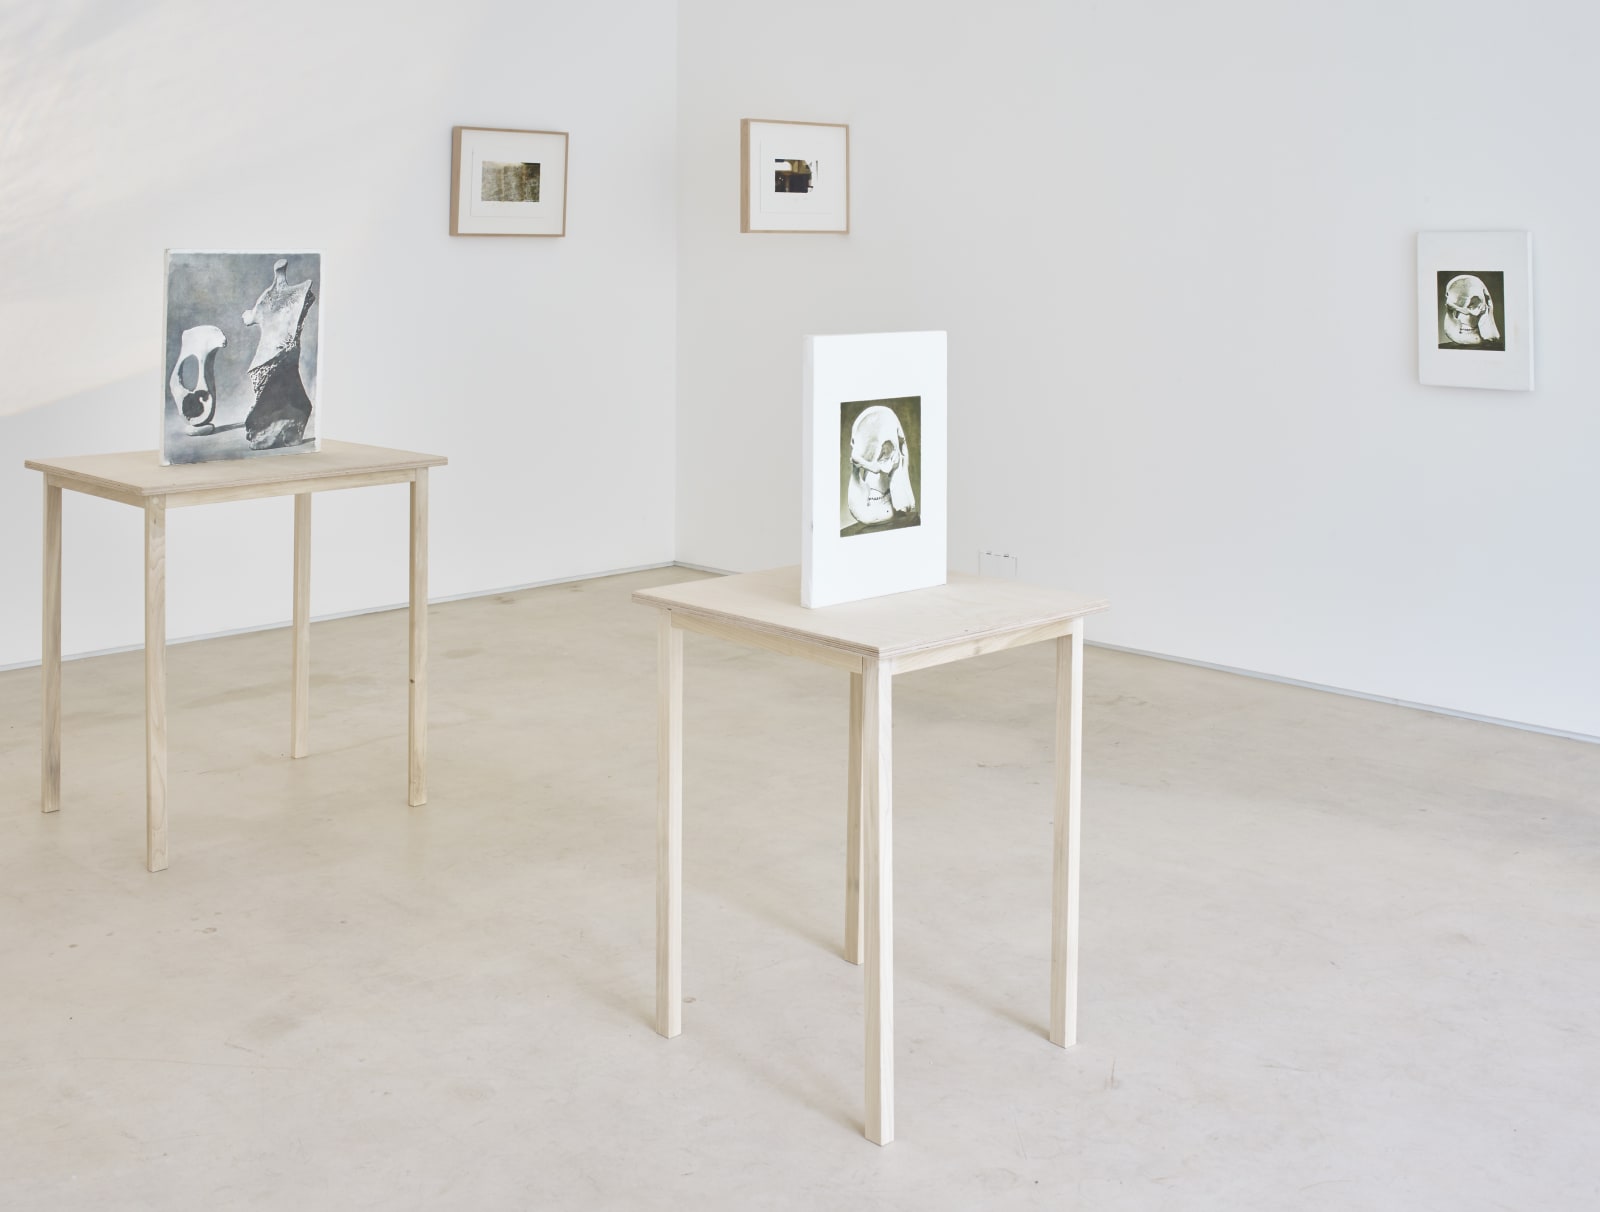 <div class="additional_caption">Juan Araujo, 'Measurable distances of space and air', PEER, London (2019)</div>